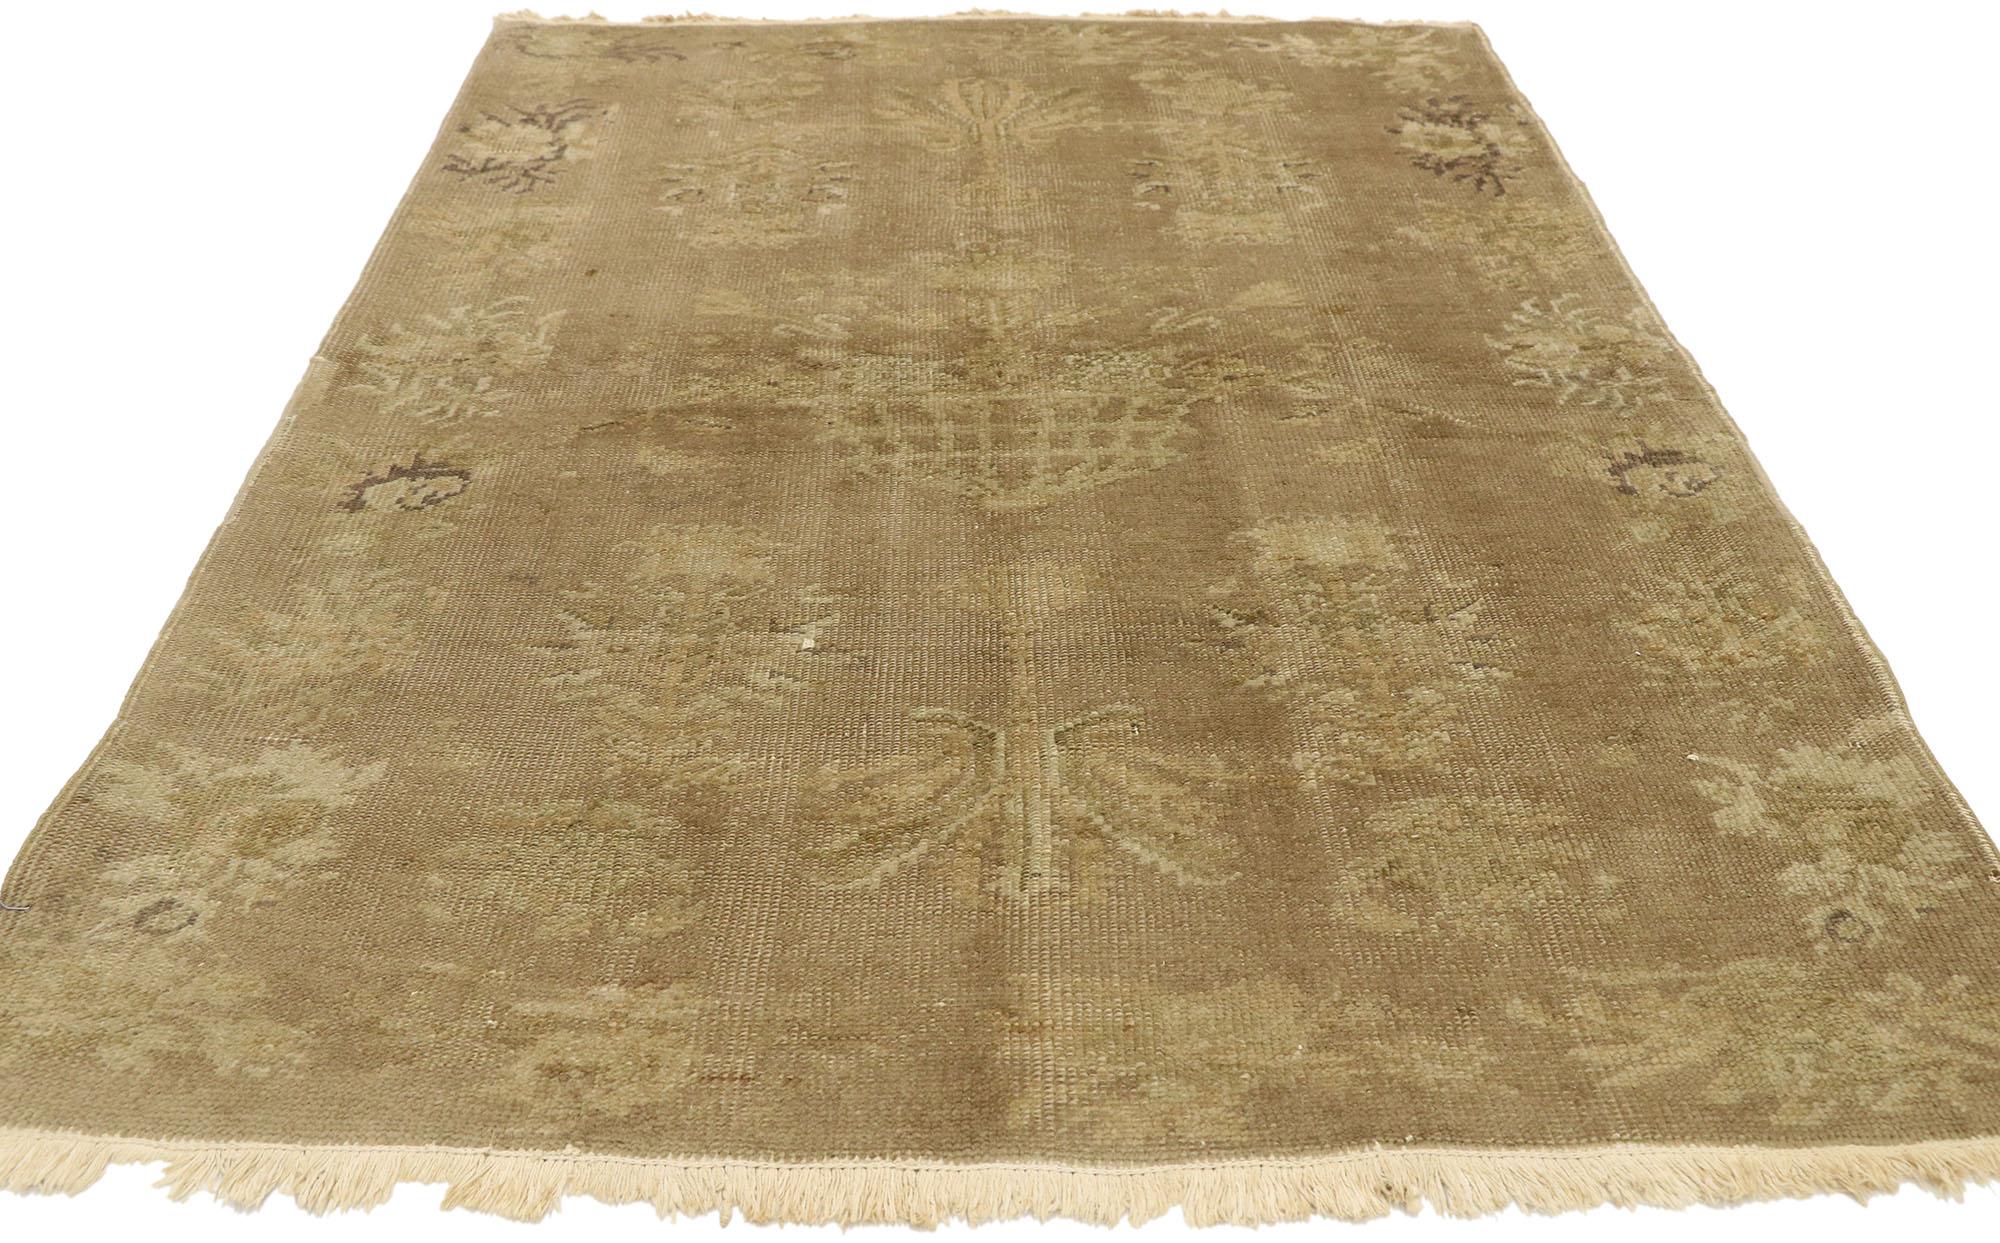 Distressed Vintage Turkish Rug with Shabby Chic Country Farmhouse Style In Distressed Condition For Sale In Dallas, TX